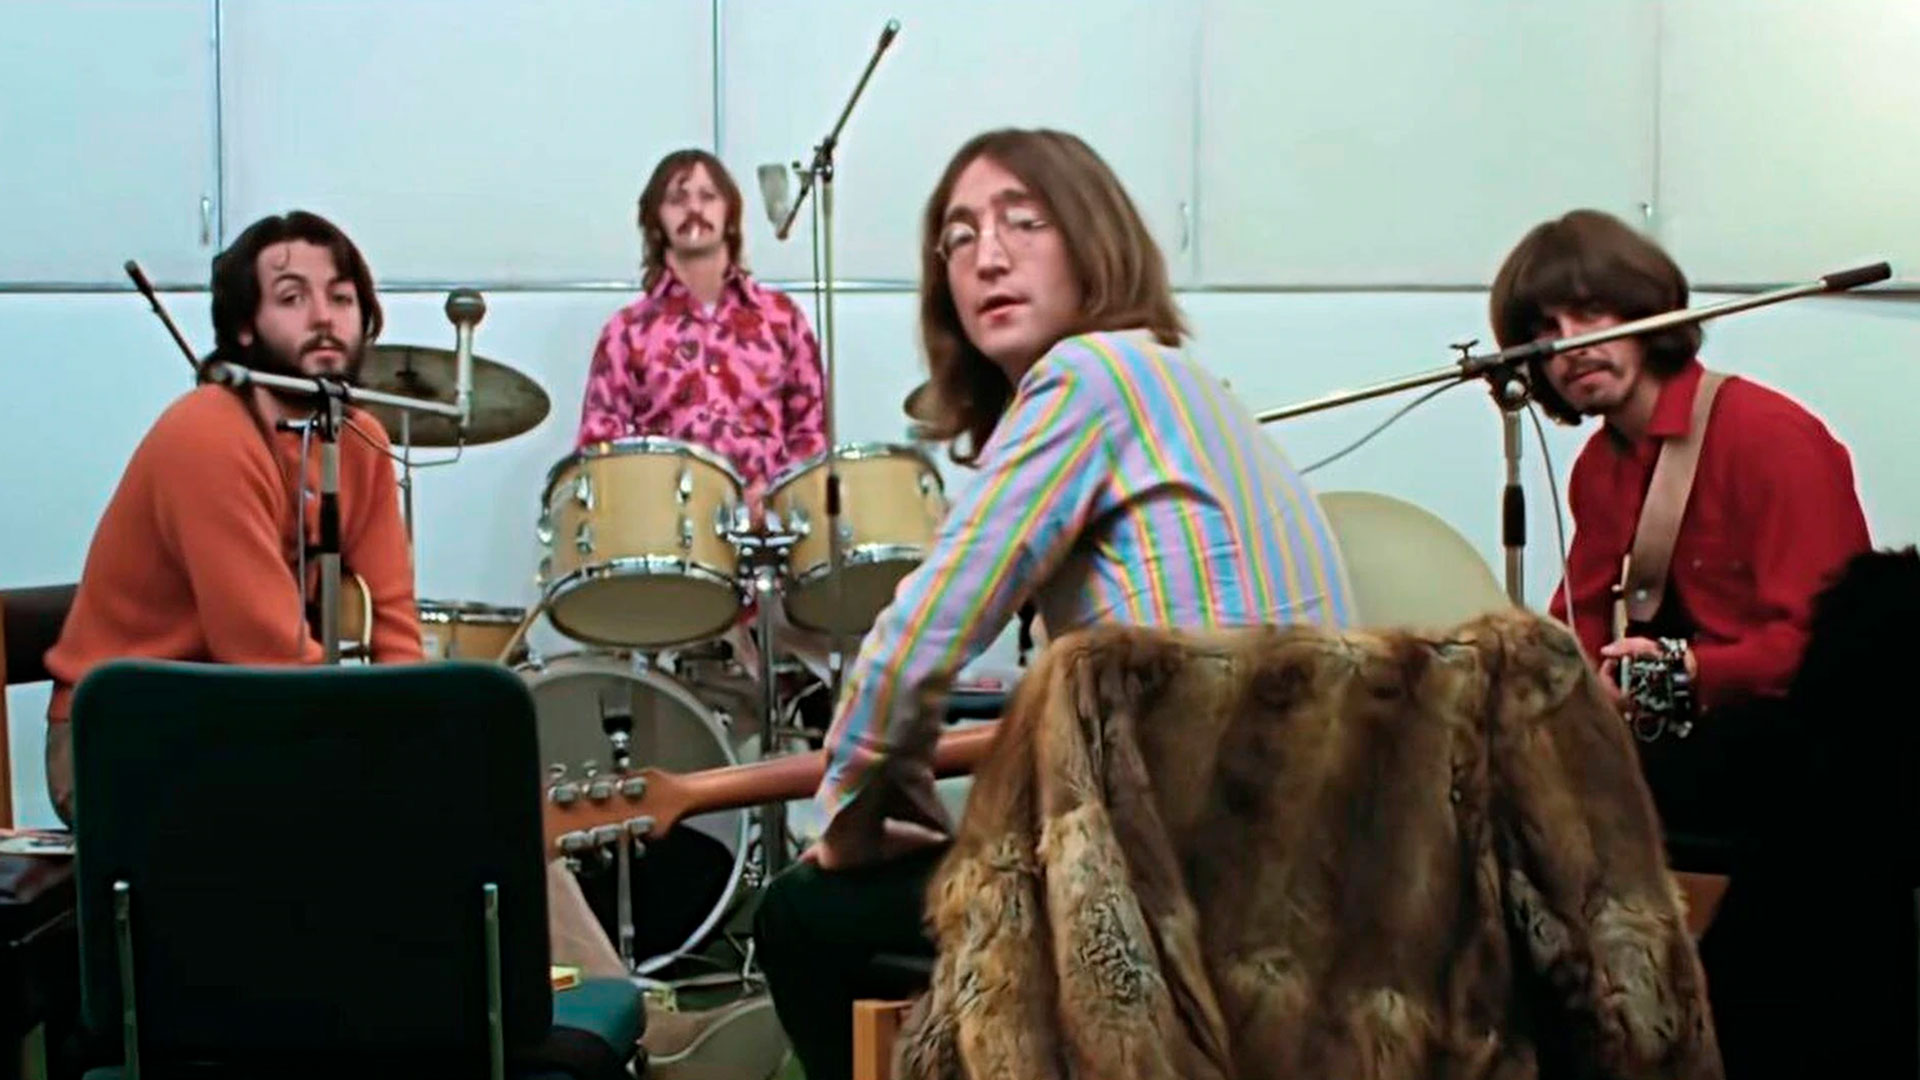 Image of the last stage of The Beatles, during the recording of the album "getback" (1970)